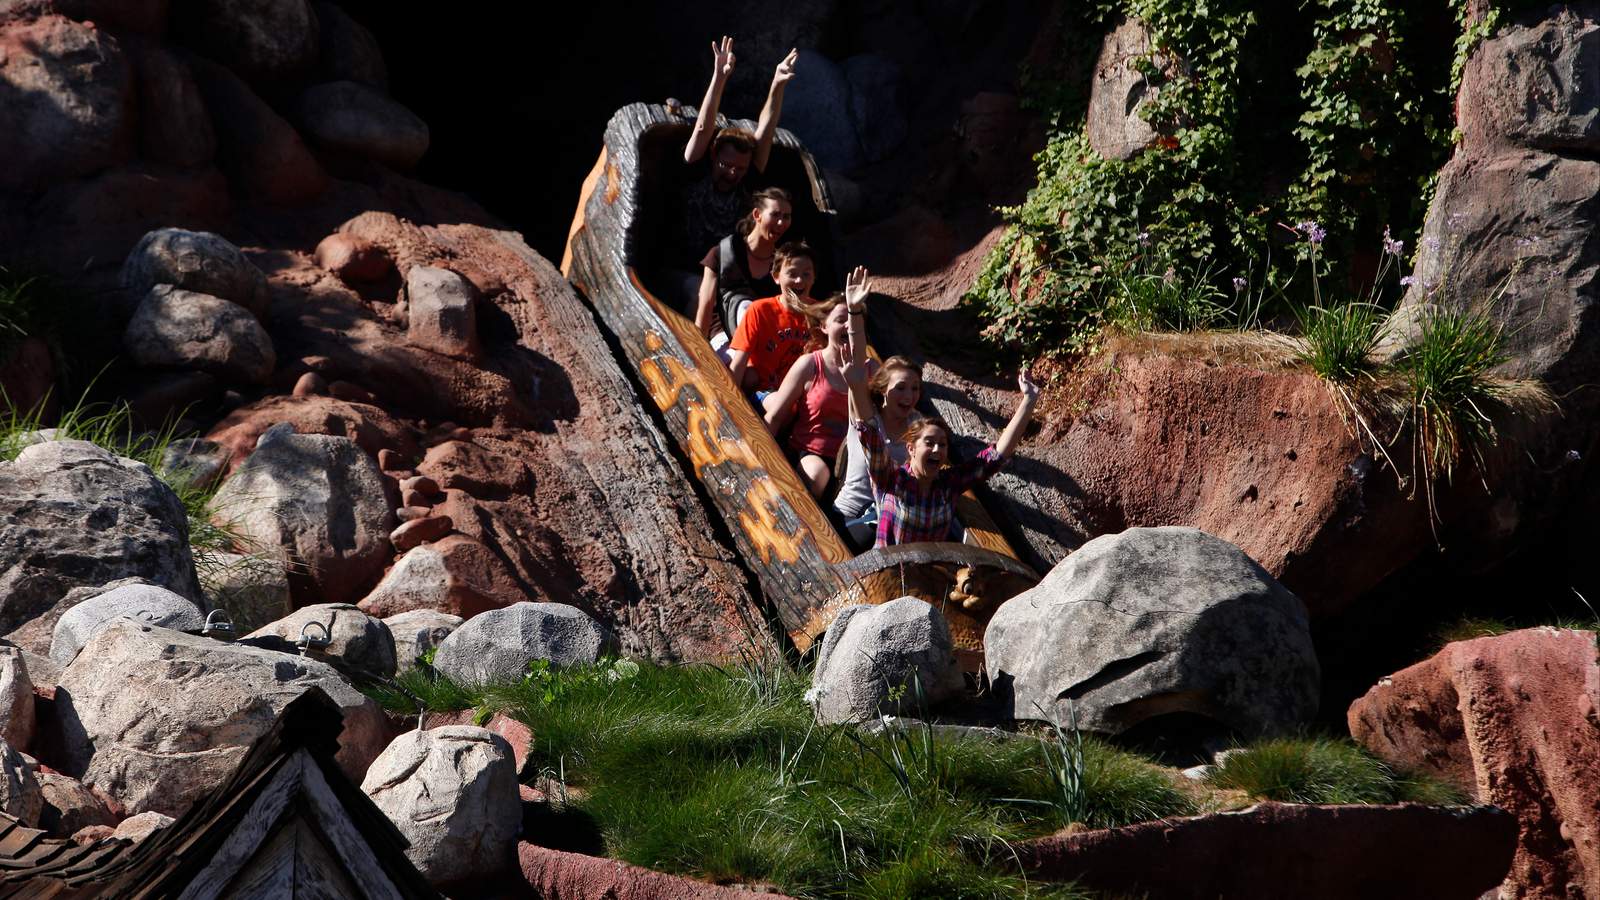 Disney fans say Splash Mountain, a ride inspired by Song of the South, should be re-themed